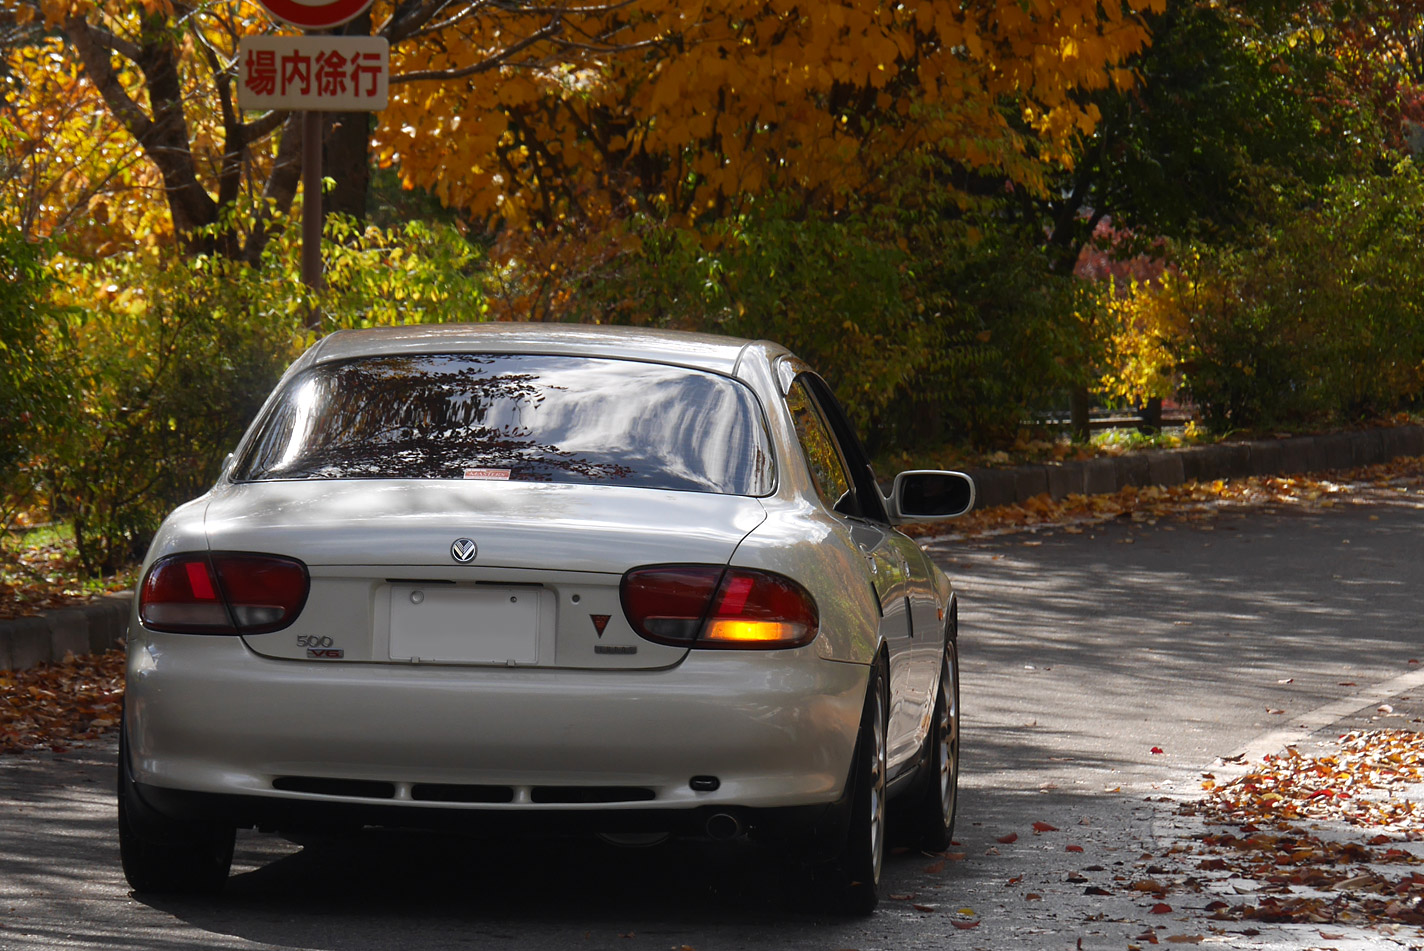 THE EUNOS500 MASTERS 15周年